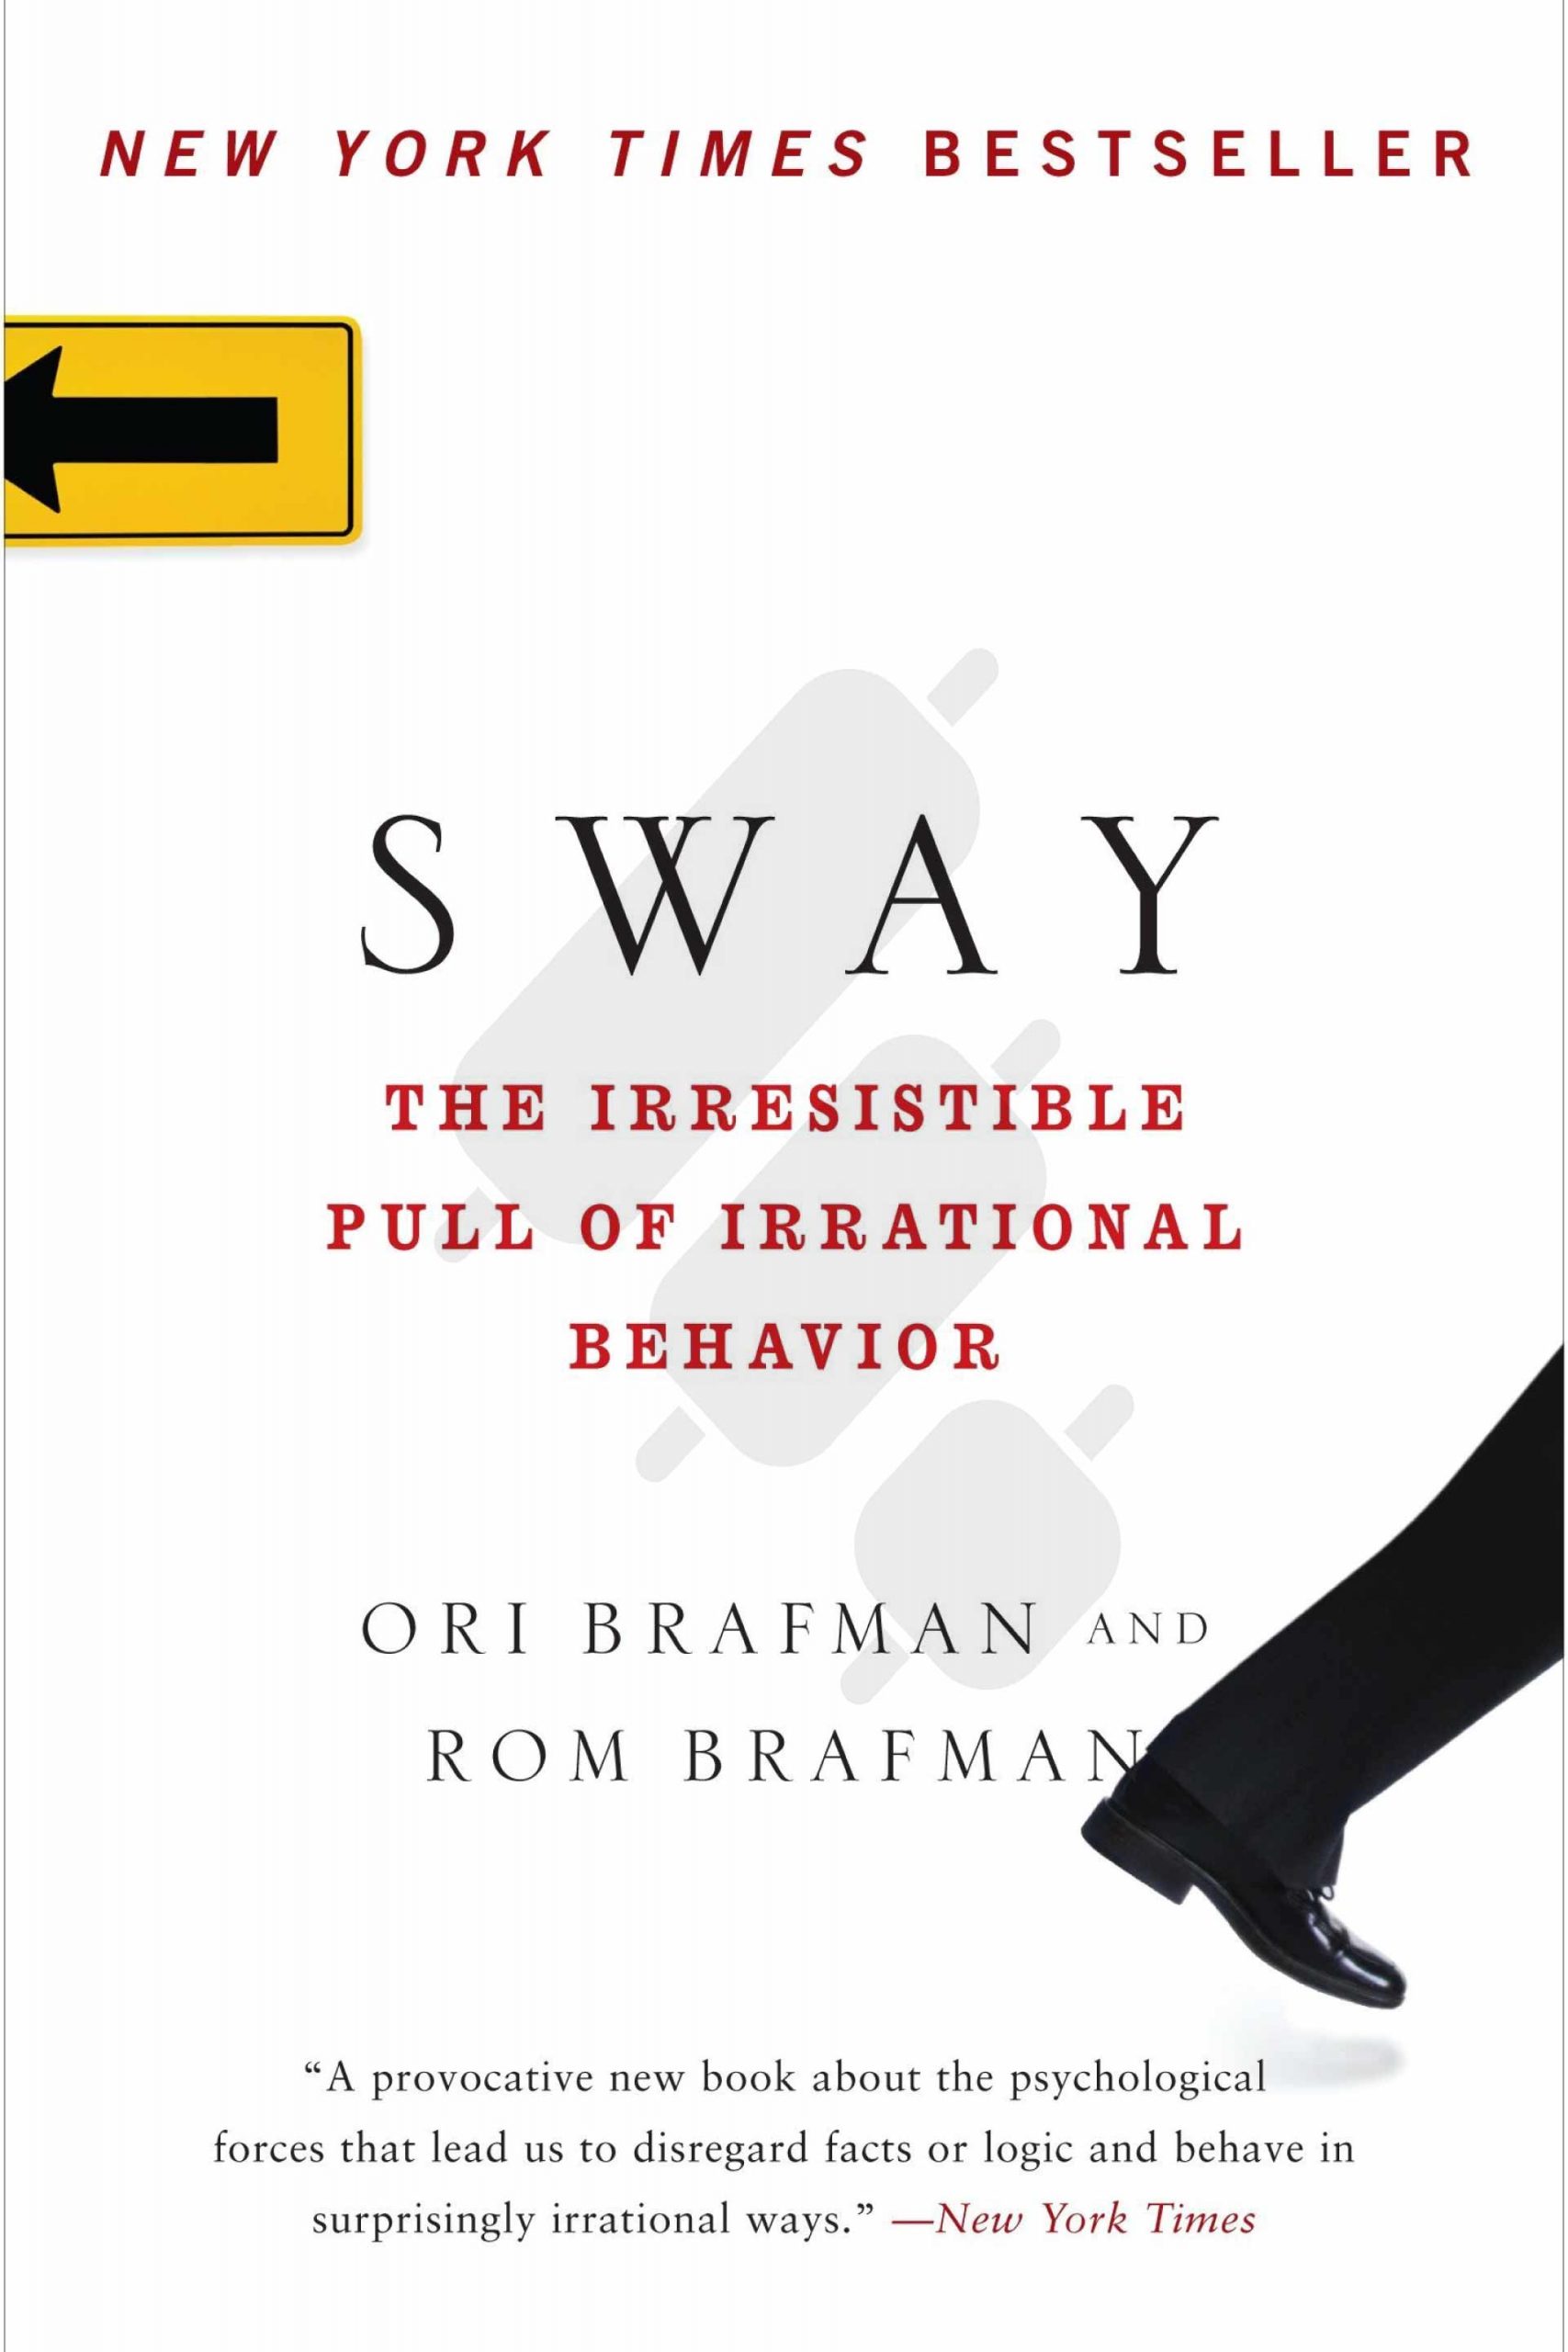 Sway: The Irresistible Pull of Irrational Behavior" by Ori Brafman and Rom Brafman (2009)